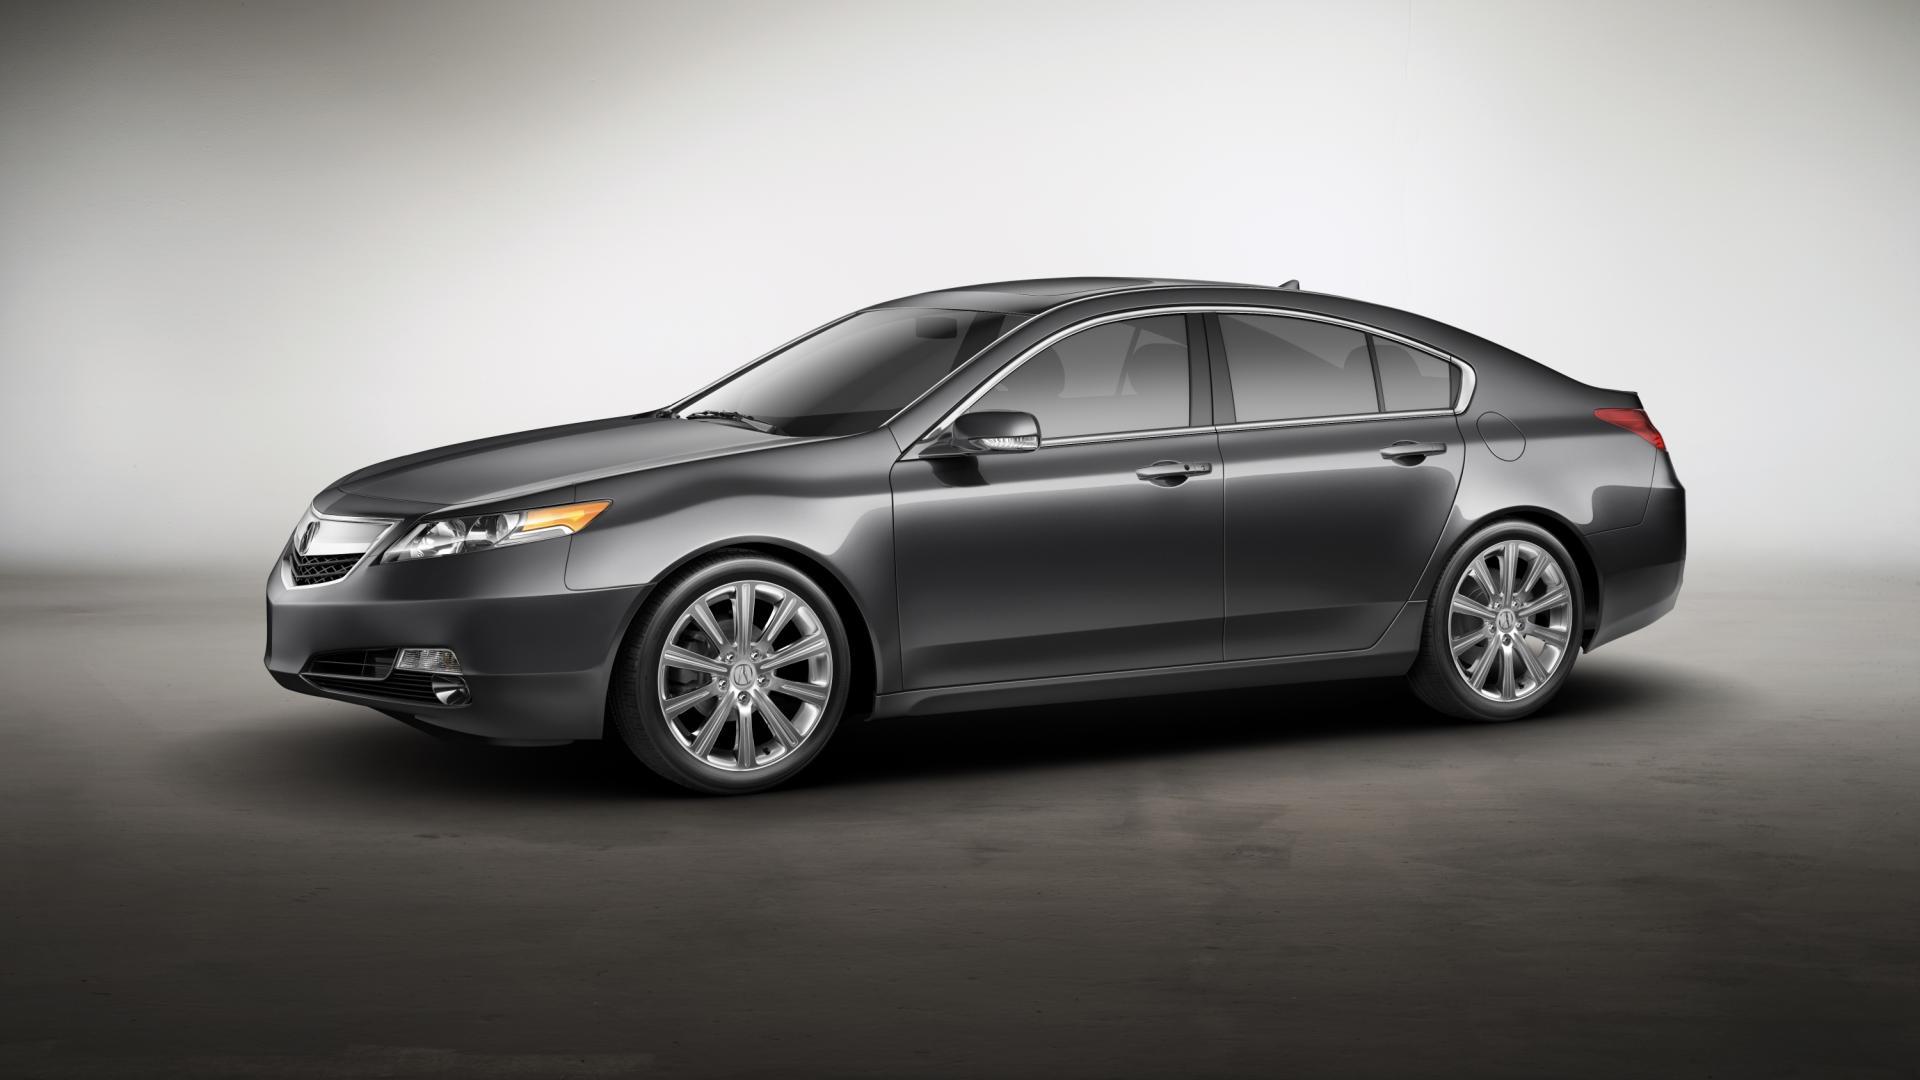 Acura TL Special Edition Wallpaper and Image Gallery